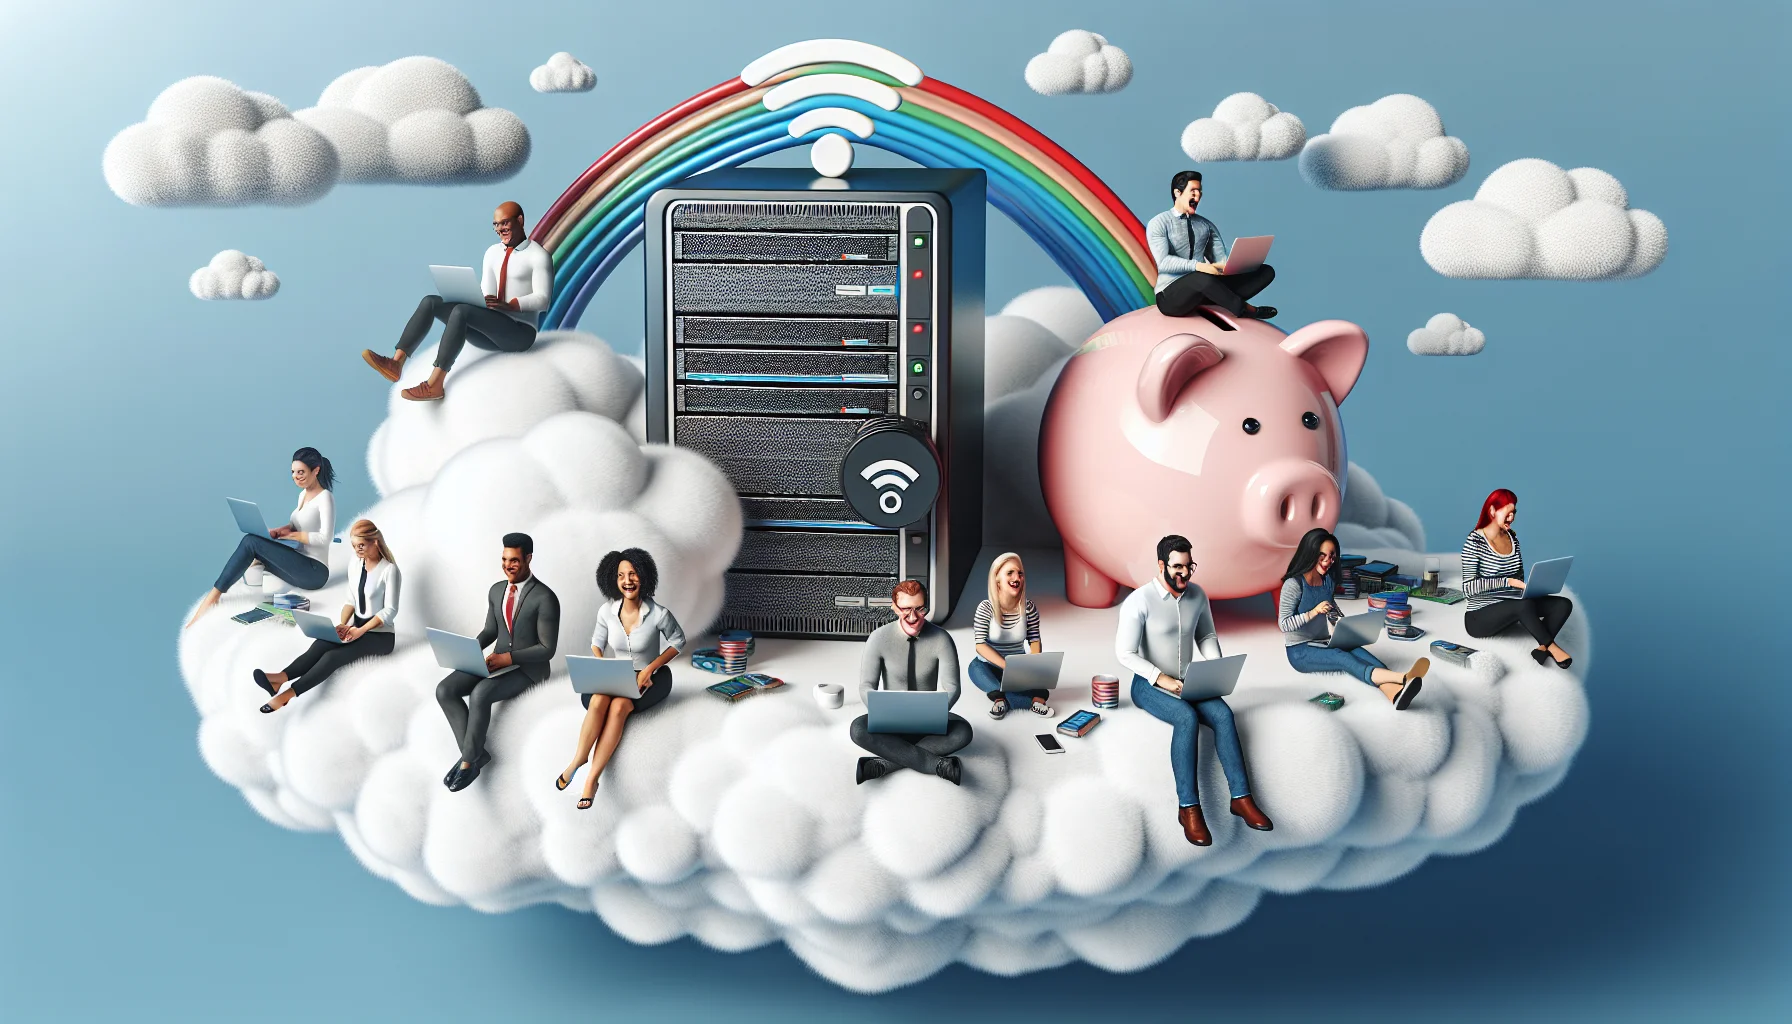 Create a realistic yet amusing image pertaining to low-cost cPanel web hosting. Imagine there's a large computer server shaped like a piggy bank (signifying affordability), sitting on a floating island surrounded by fluffy white 'data' clouds. On the island, a diverse group of engineers, consisting of a Middle-Eastern woman, Caucasian man, and a Black woman, are enthusiastically and jovially working on their laptops, signifying the enticement of web hosting. A rainbow in the background subtly forms the shape of a Wi-Fi signal, further emphasizing the concept of internet and web hosting.